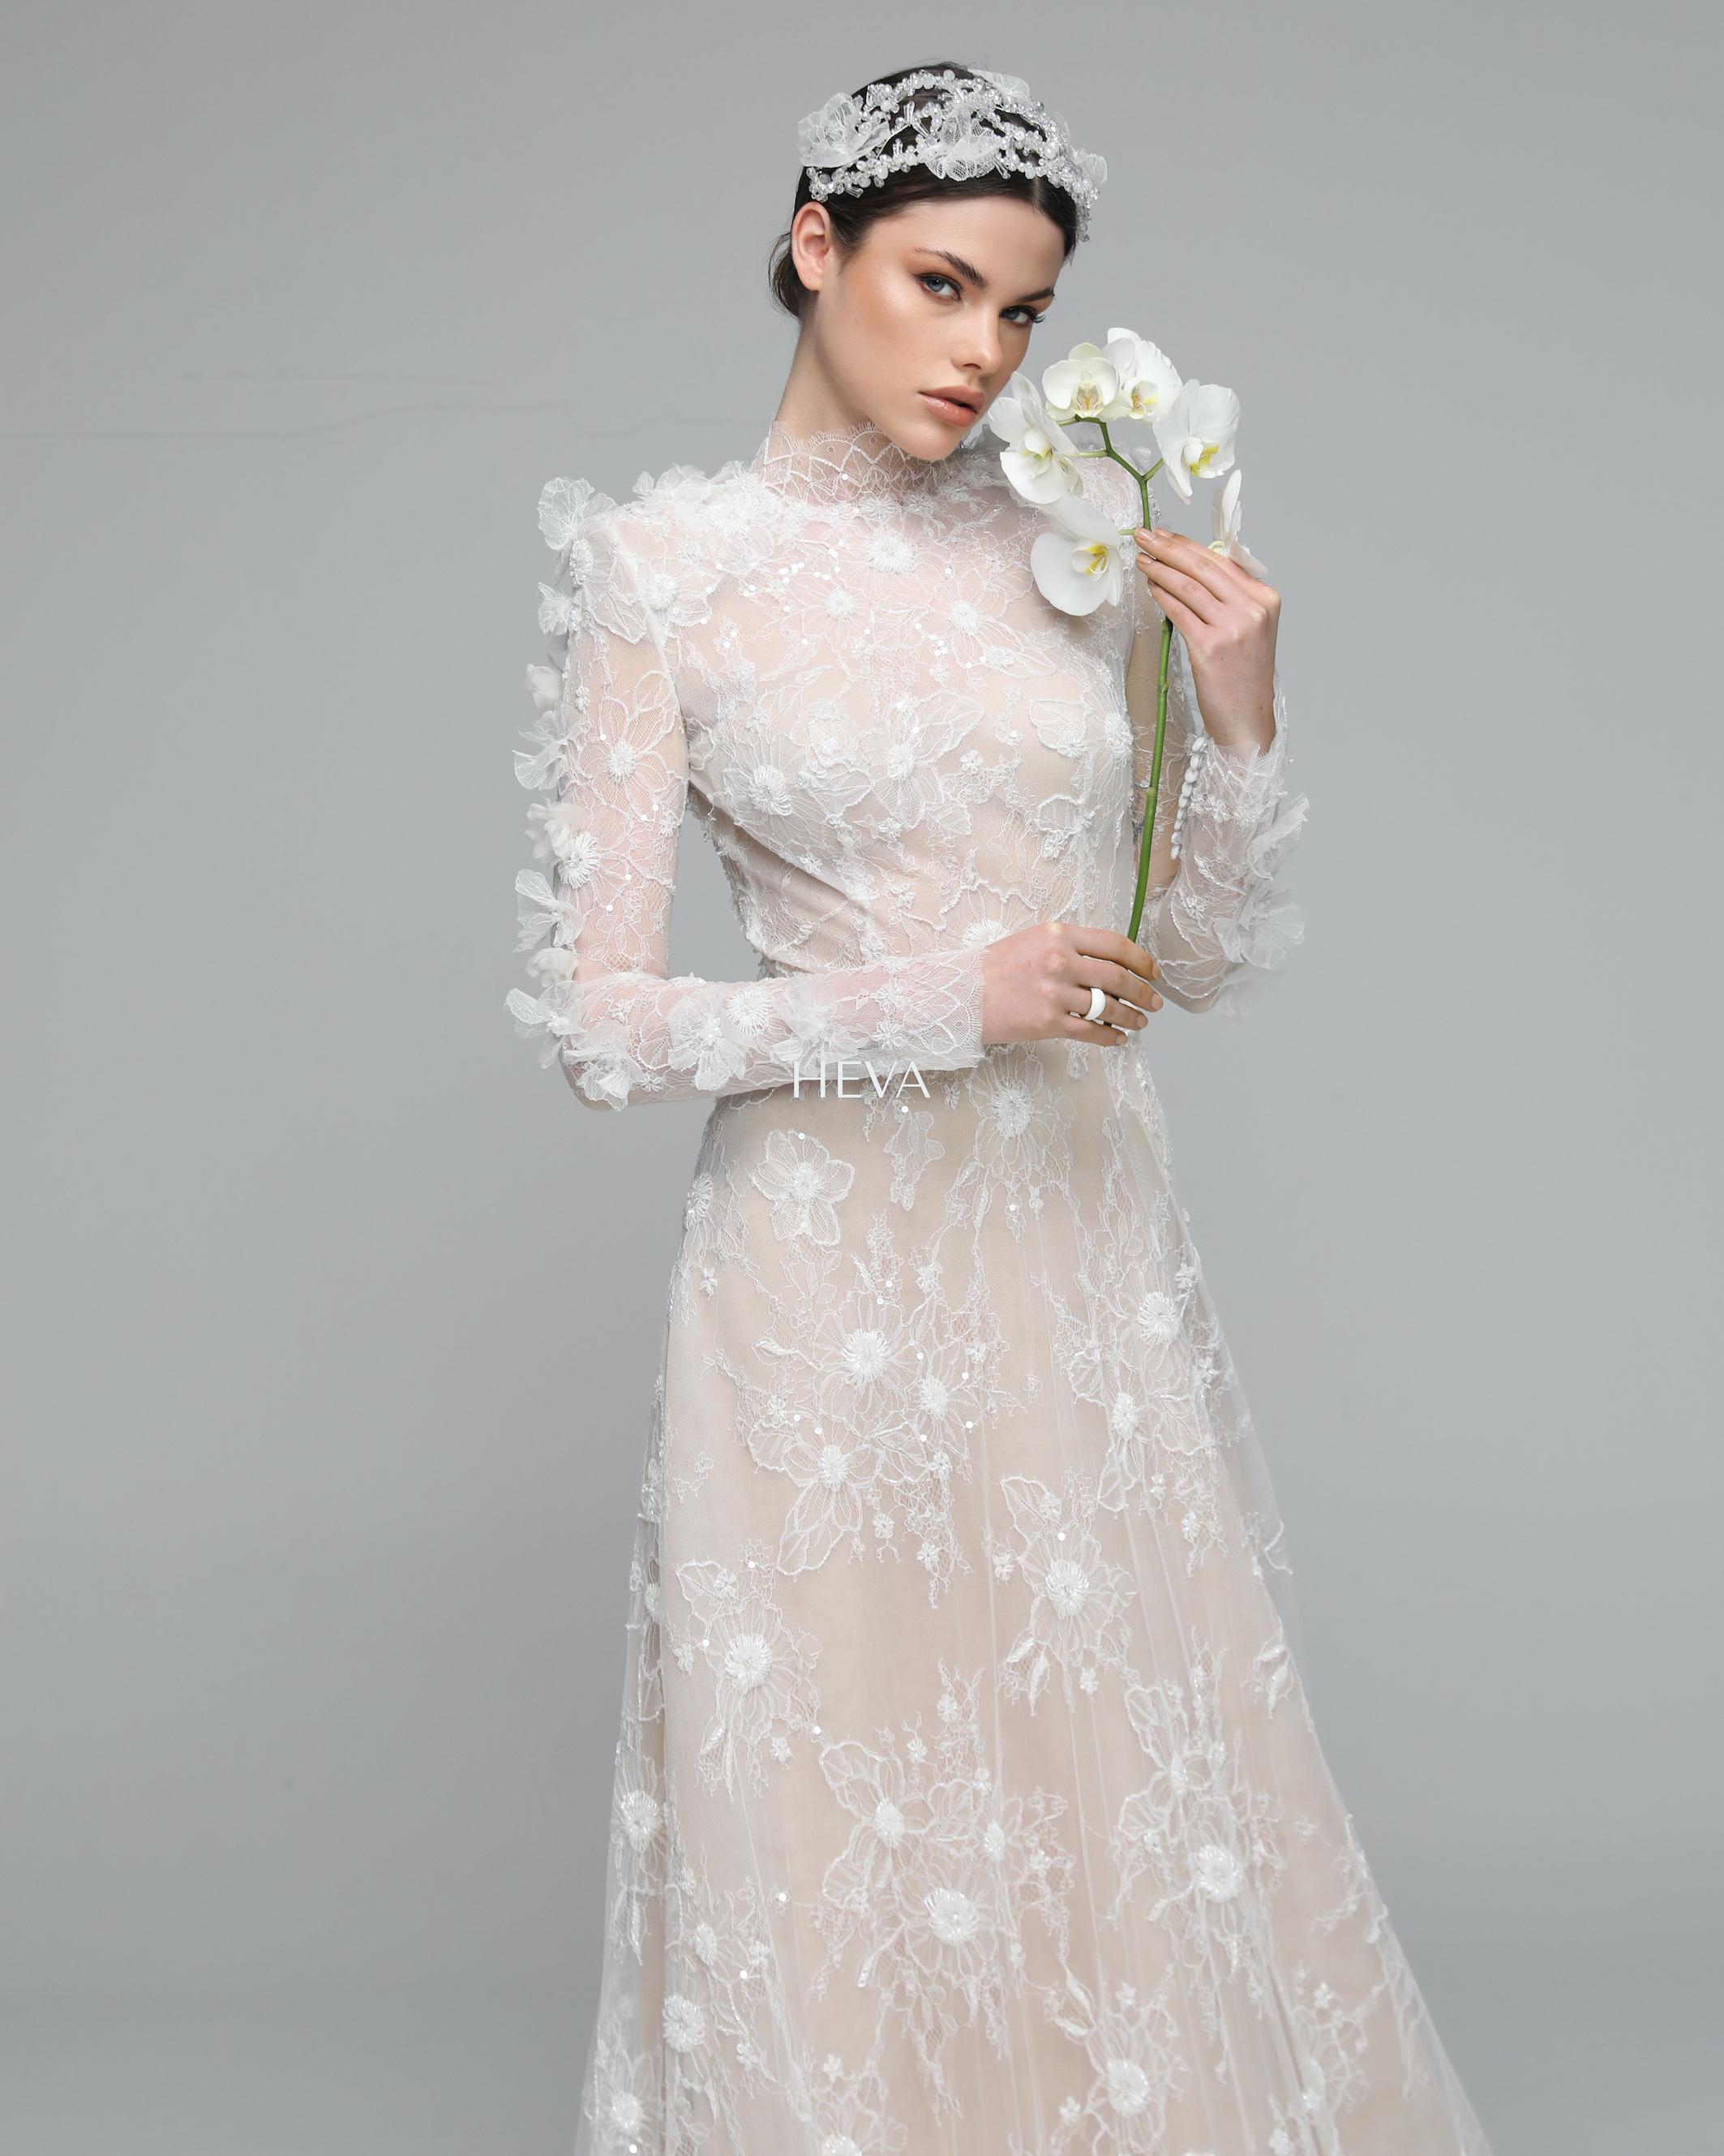 HV22015 - Low-Cut Back, Long-Sleeved Wedding Gown with Transparent Bodice, Layered and Frilled Back, Lightly Pleated Skirt, Fully French Lace Overlay and Three-Dimensional Flower Embellishments